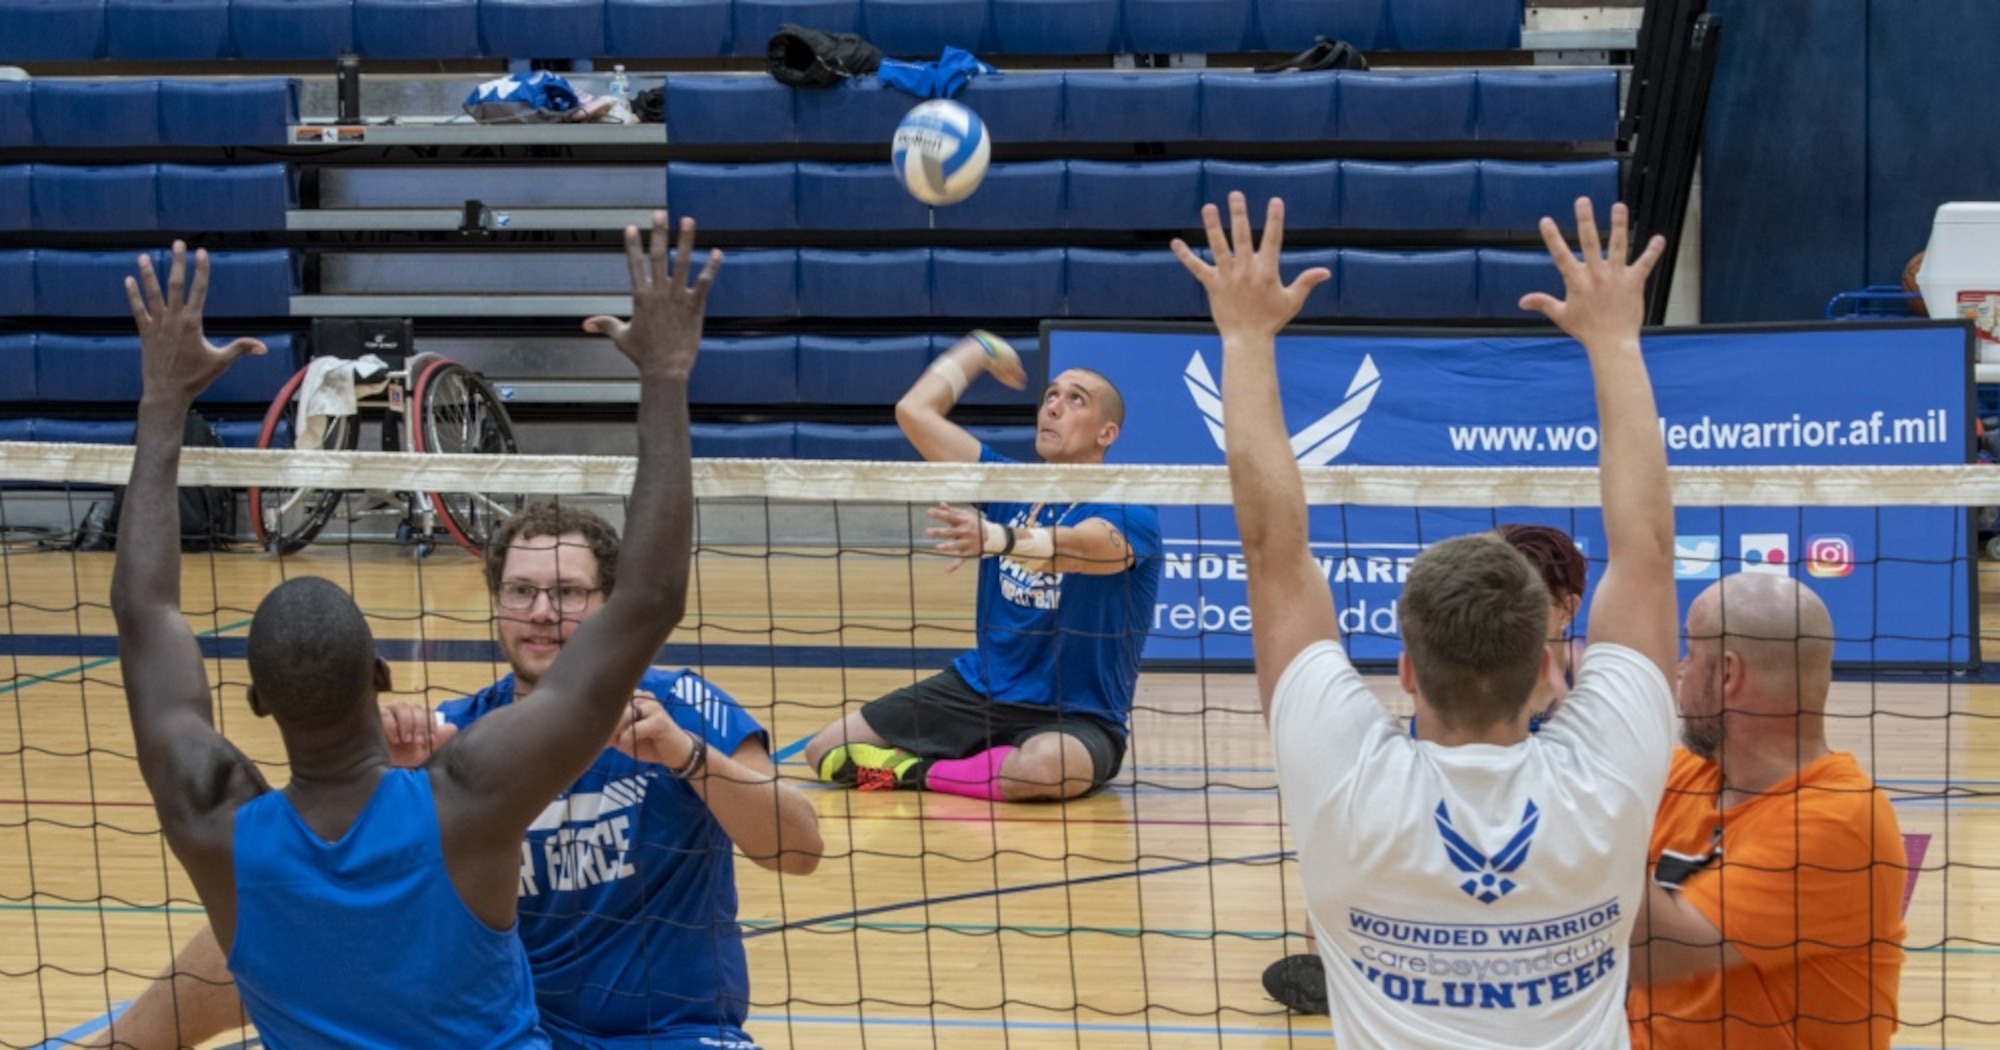 Wounded warrior serves volleyball.